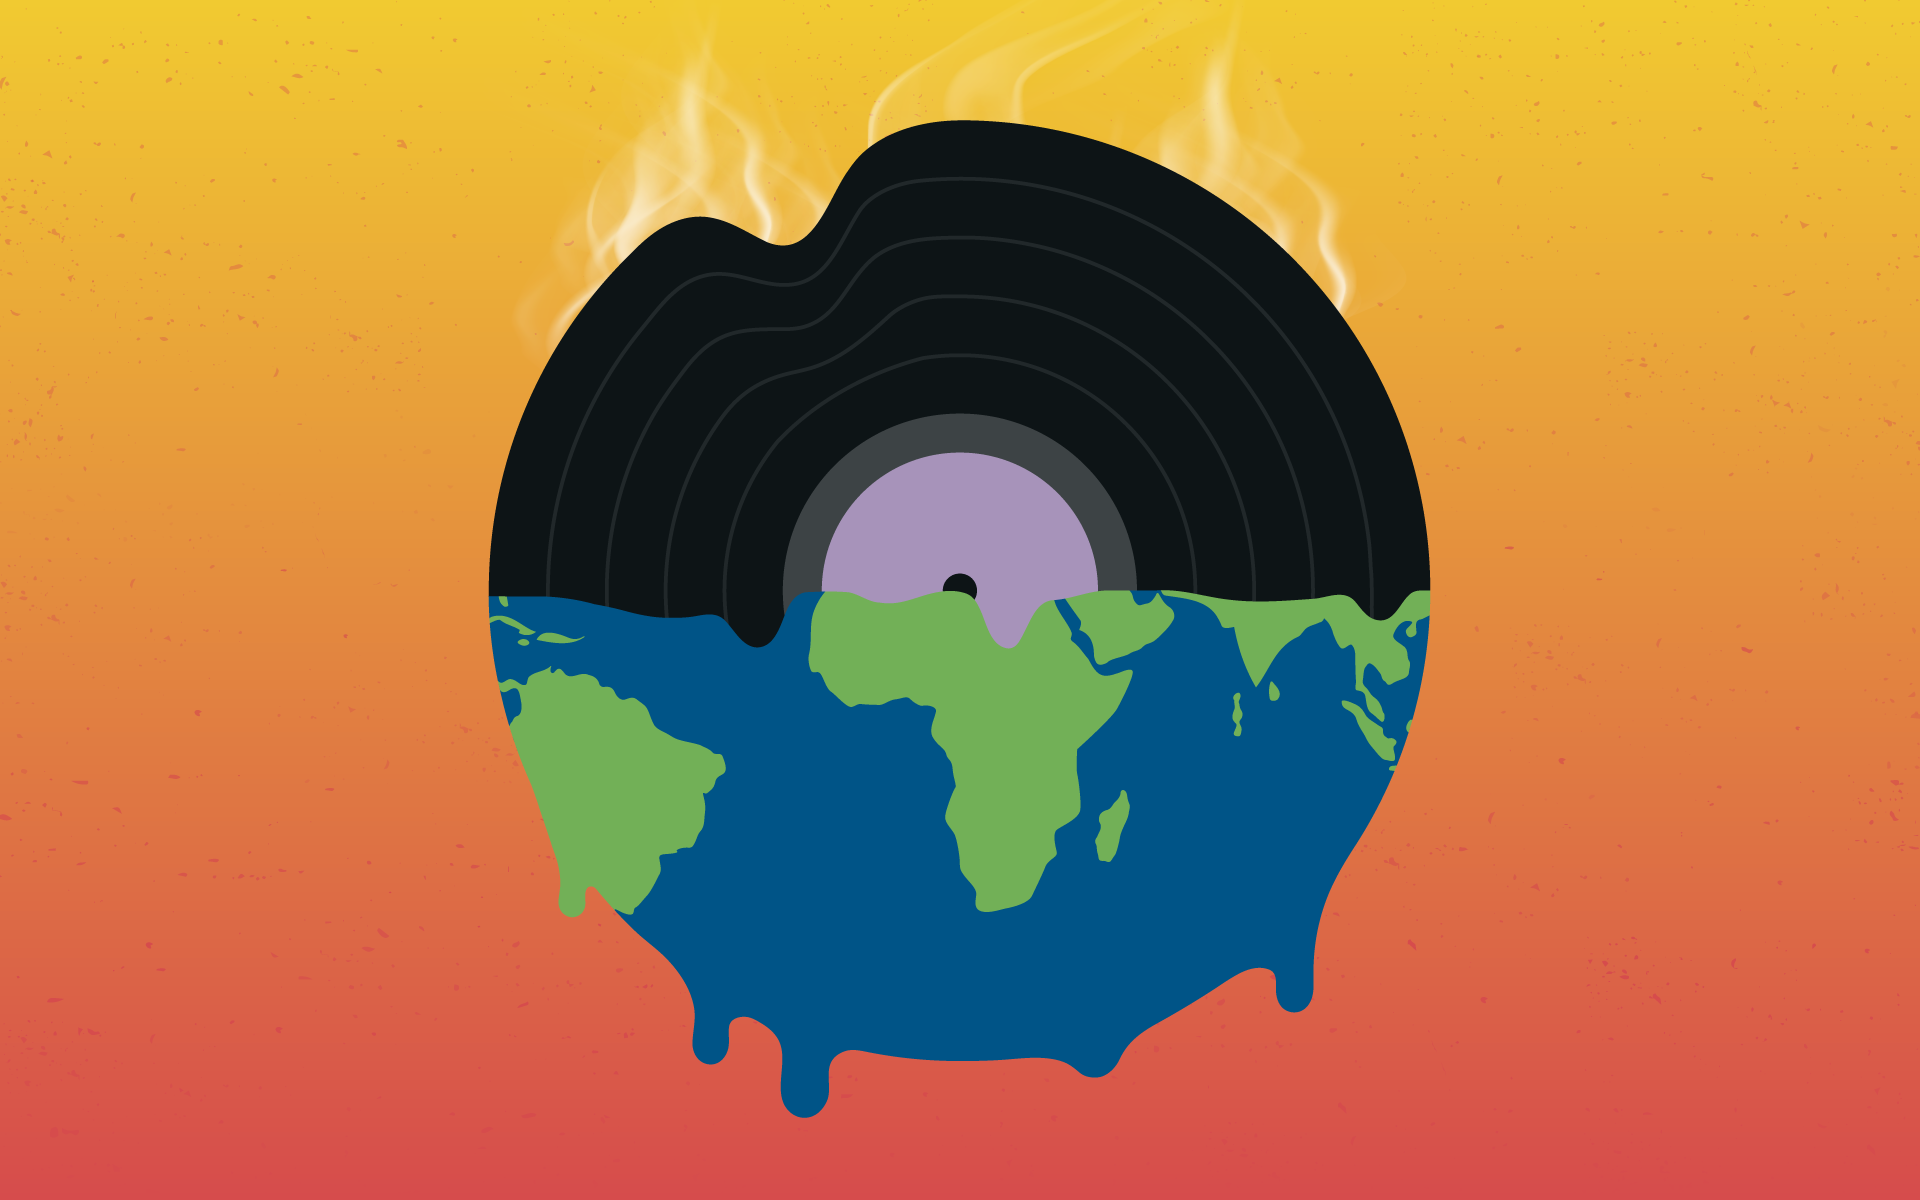 A graphic of a circle that is half a vinyl record on top, half Earth on the bottom. The vinyl record on top is steaming and the Earth below is melting. The background is orange and red ombre with speckles.